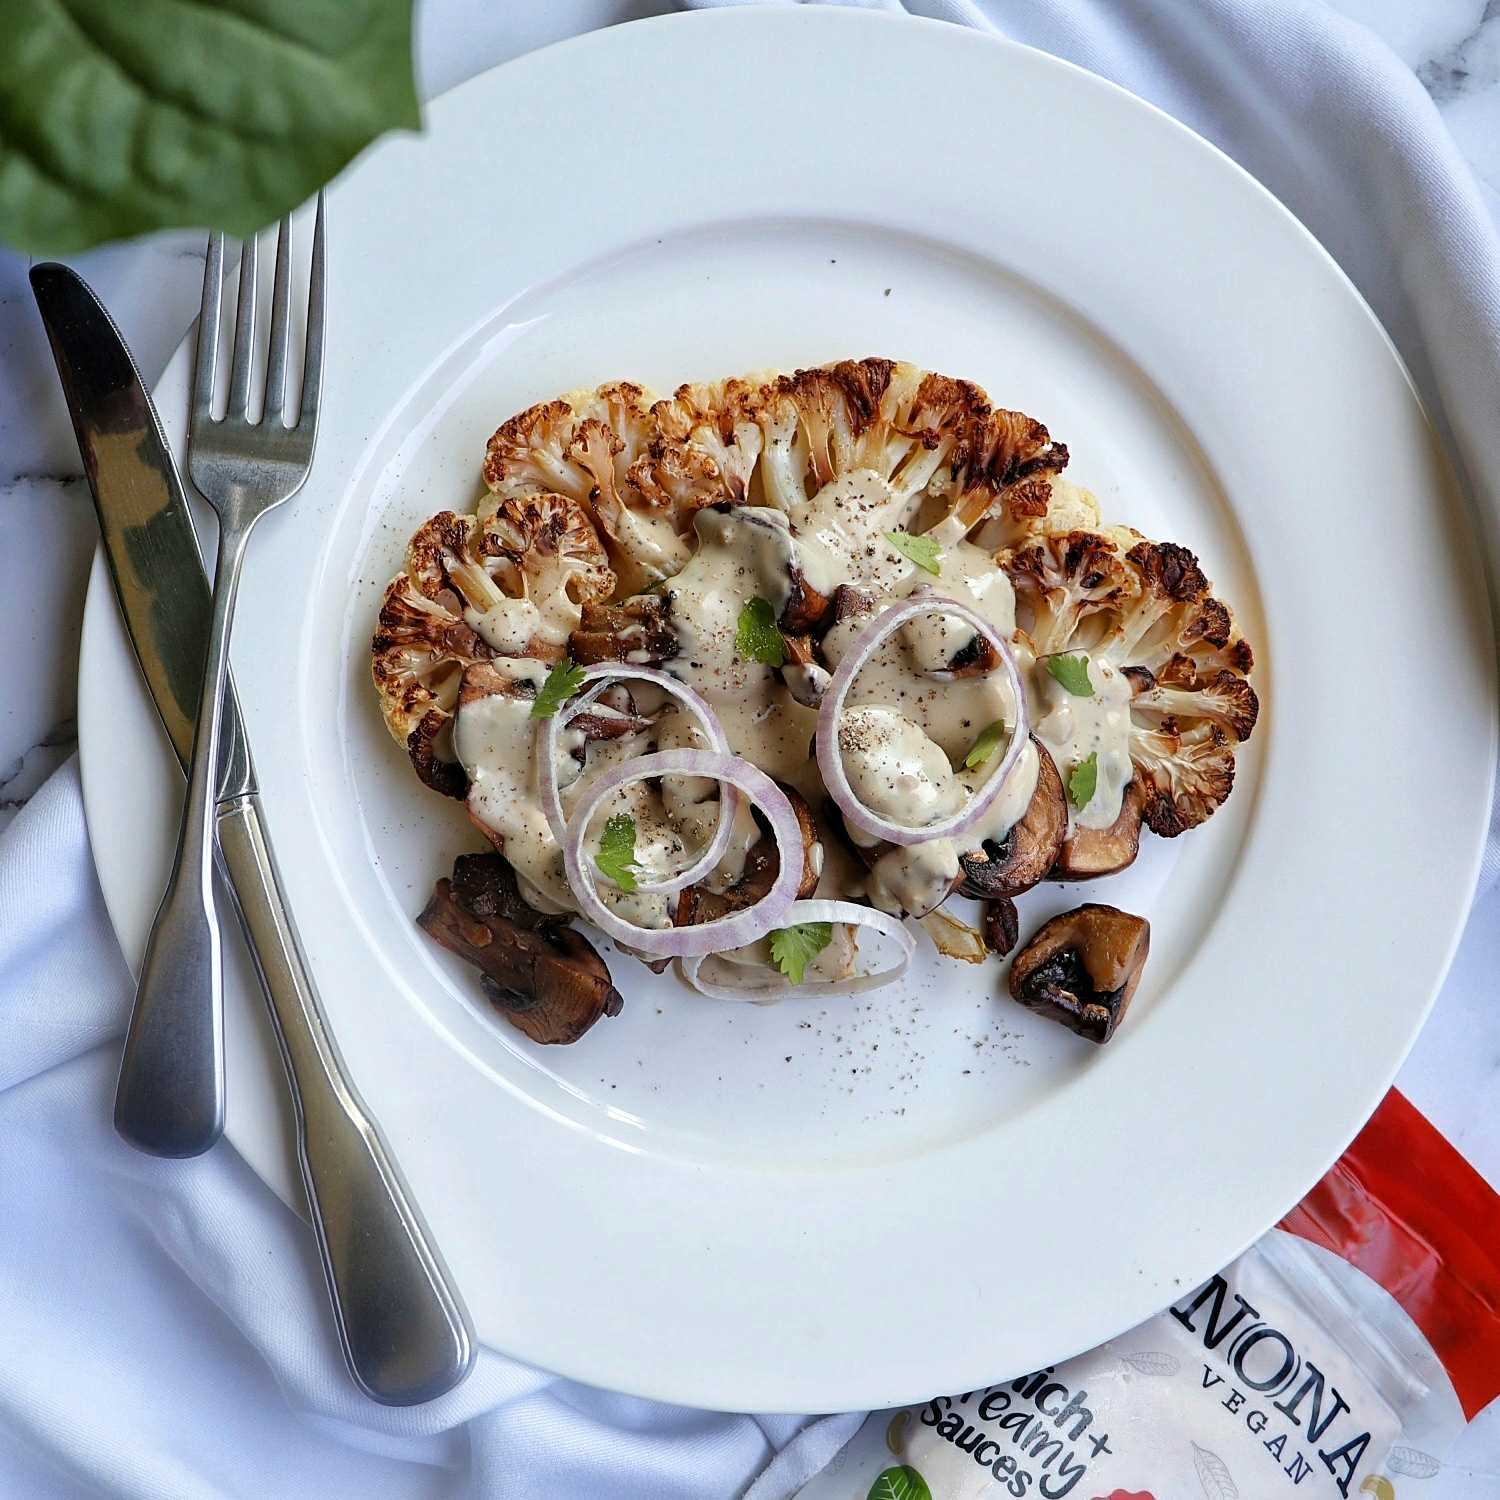 Resting on a white plate is a wide slice of cauliflower, slathered in NONA's Carbonara-style sauce, golden roasted mushrooms, and three rings of fresh red onion.